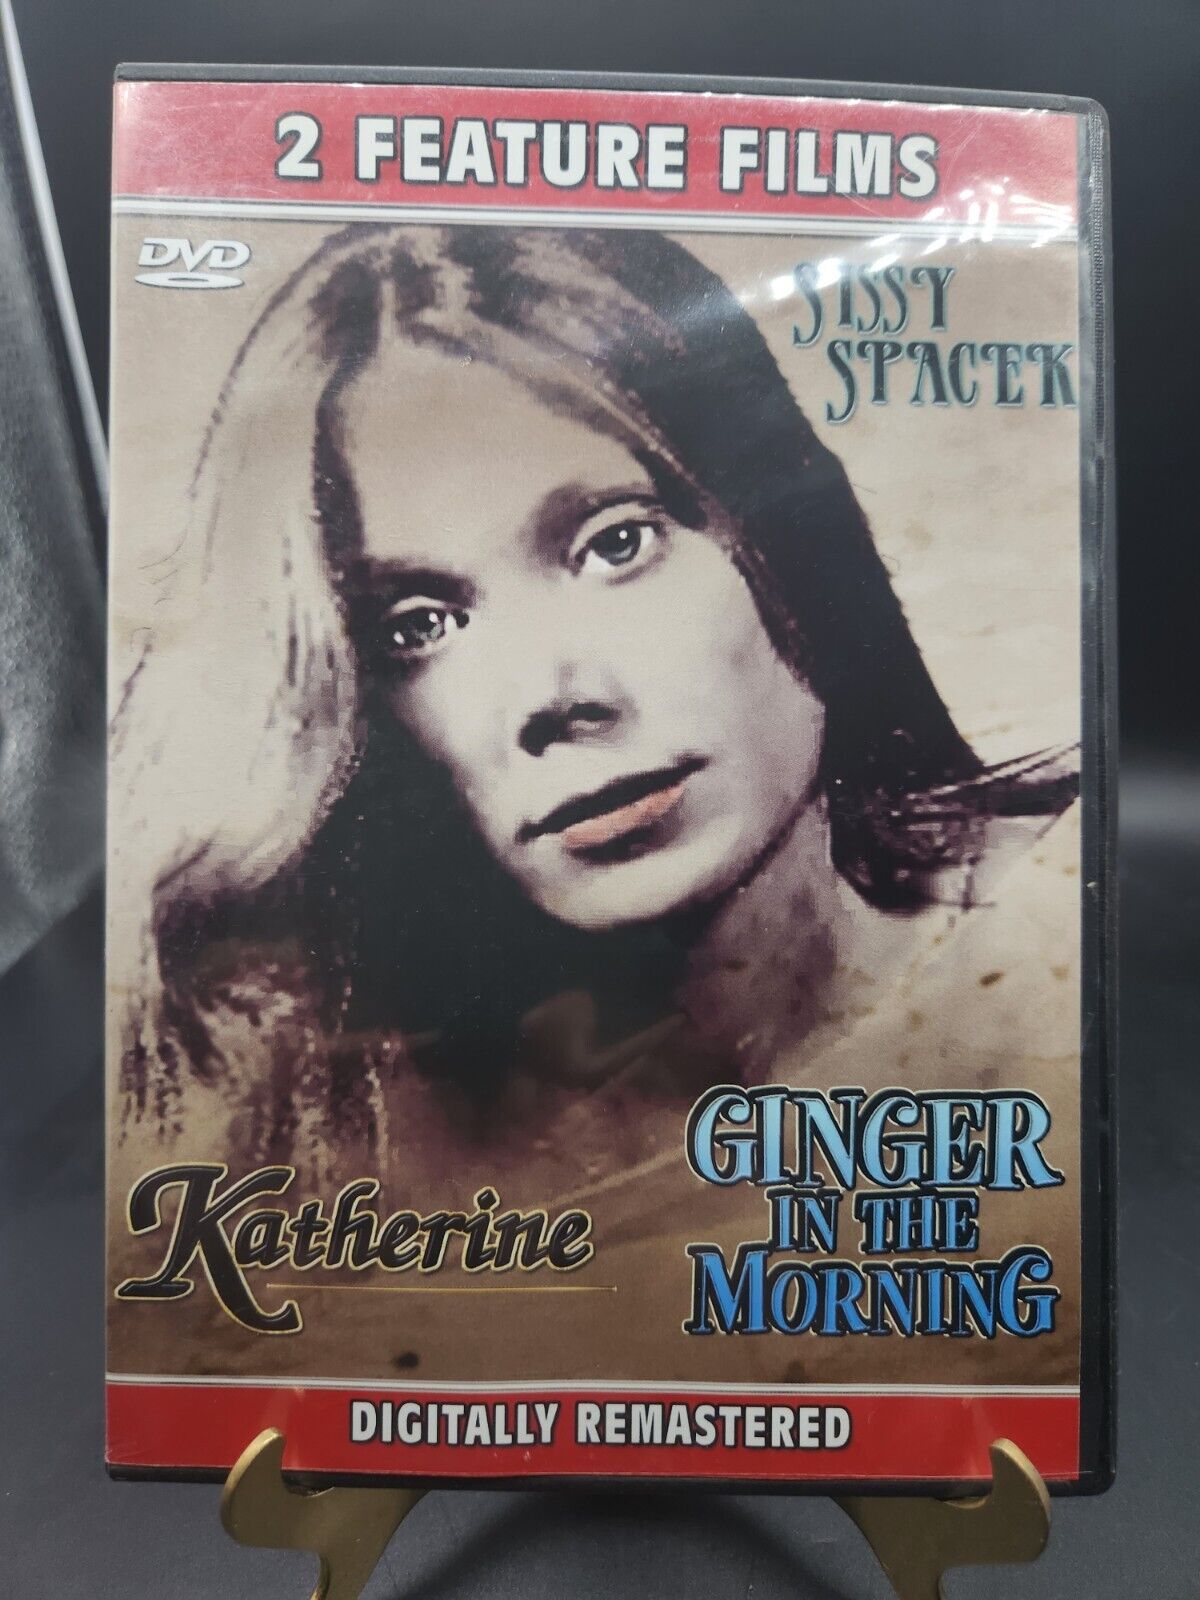 Ginger in the Morning / Katherine - Double Feature (DVD, 1973) Sissy Spacek